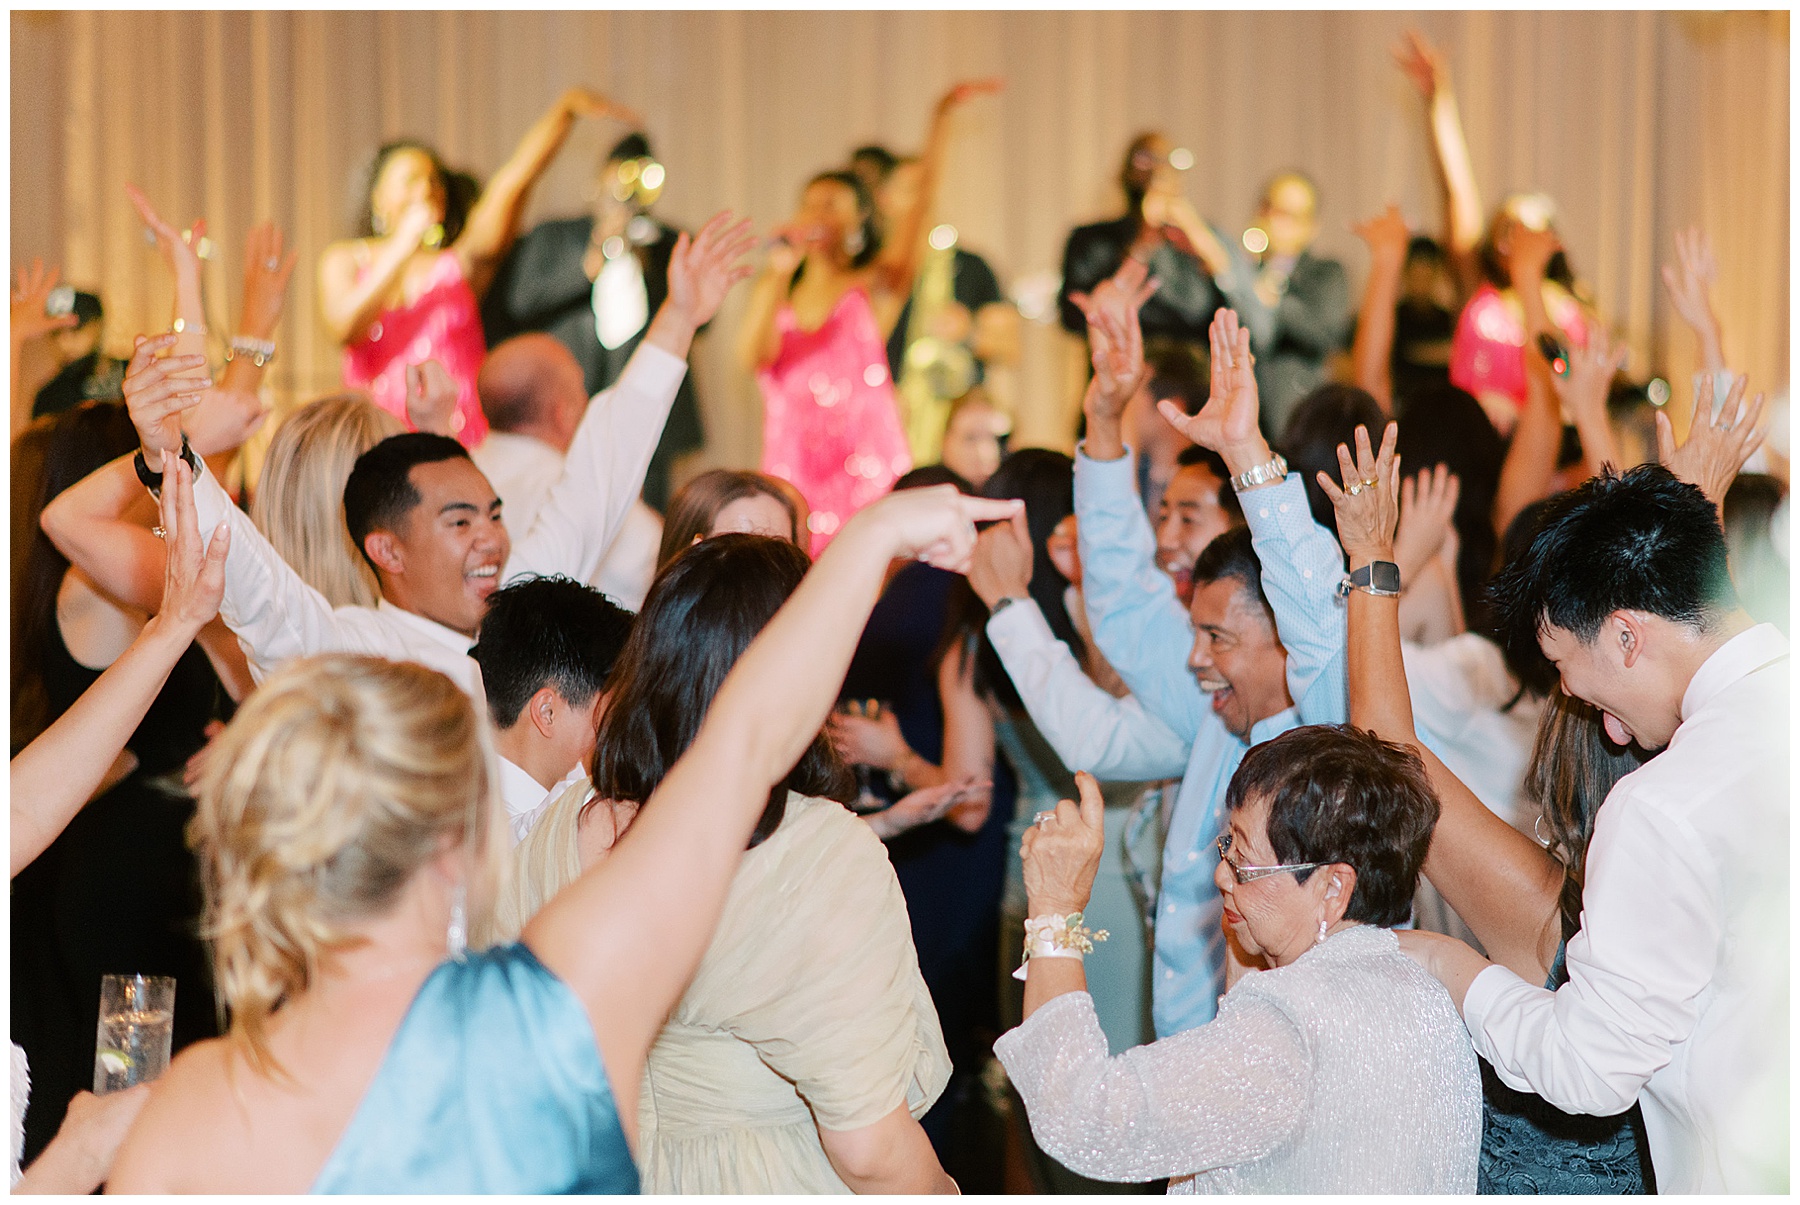 guests dance during Charleston wedding reception to live band in background 